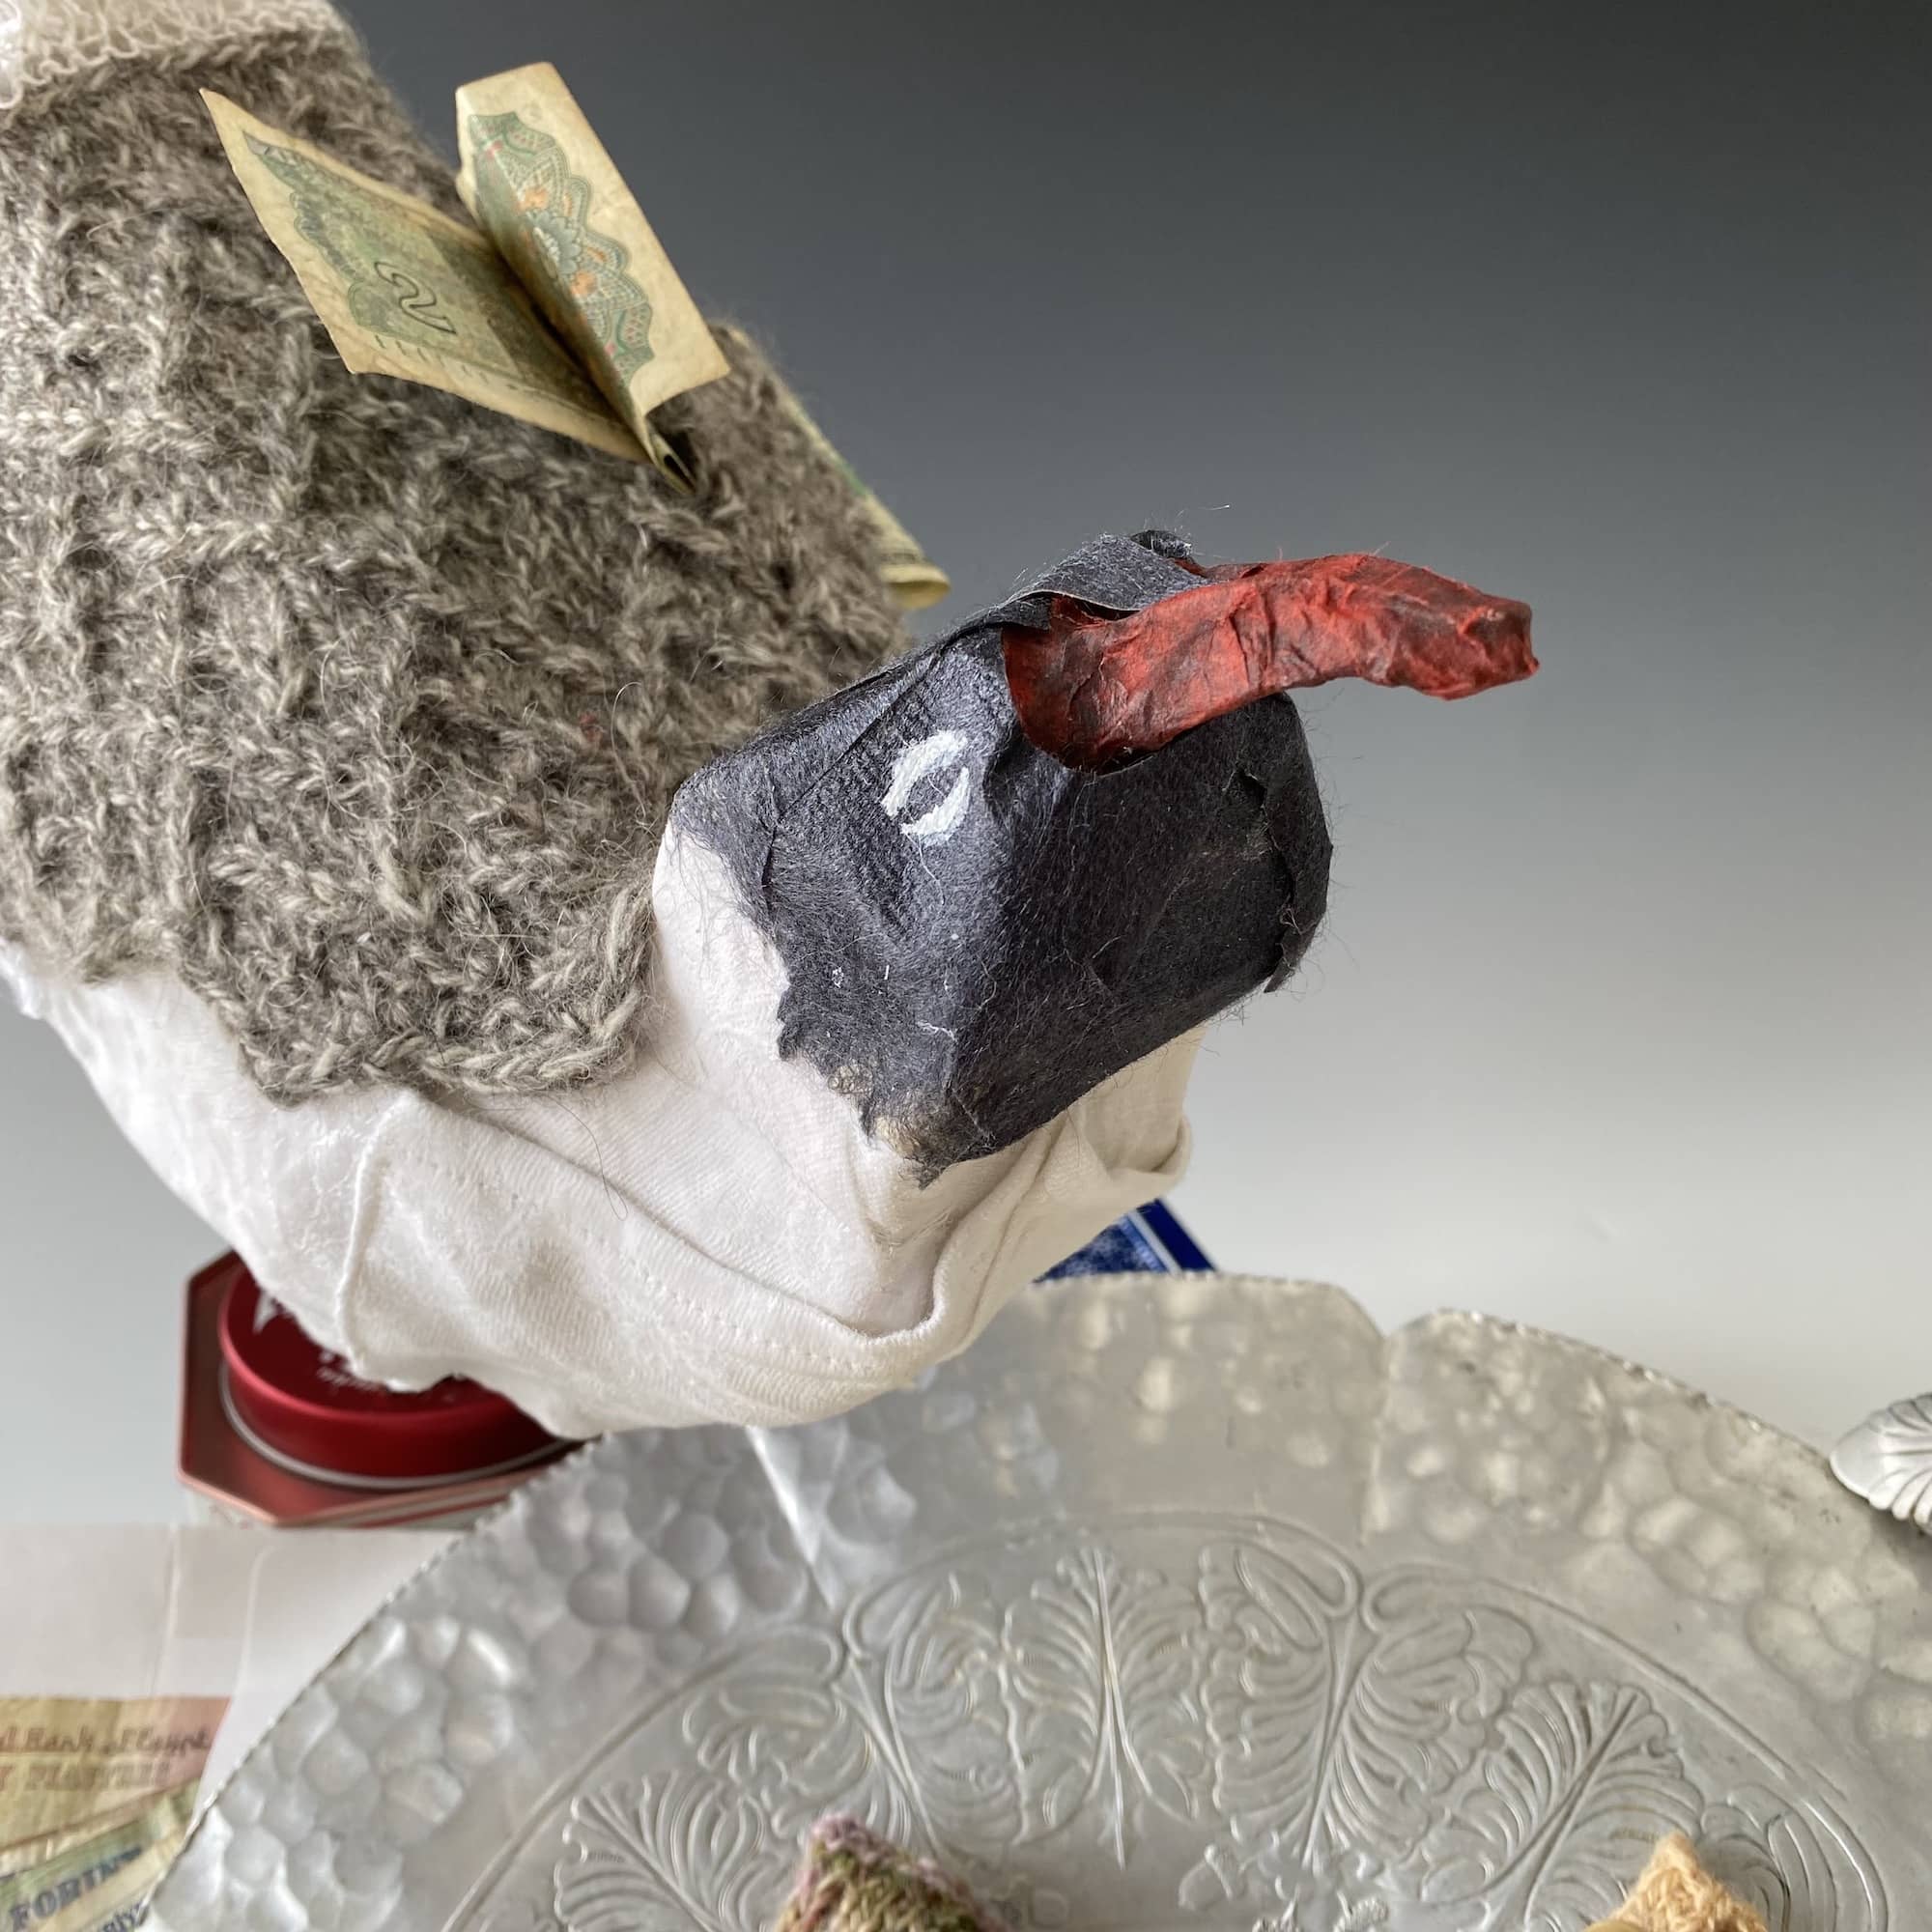 mixed media sculpture of gull perched on edge of metal platter with money tucked under wing